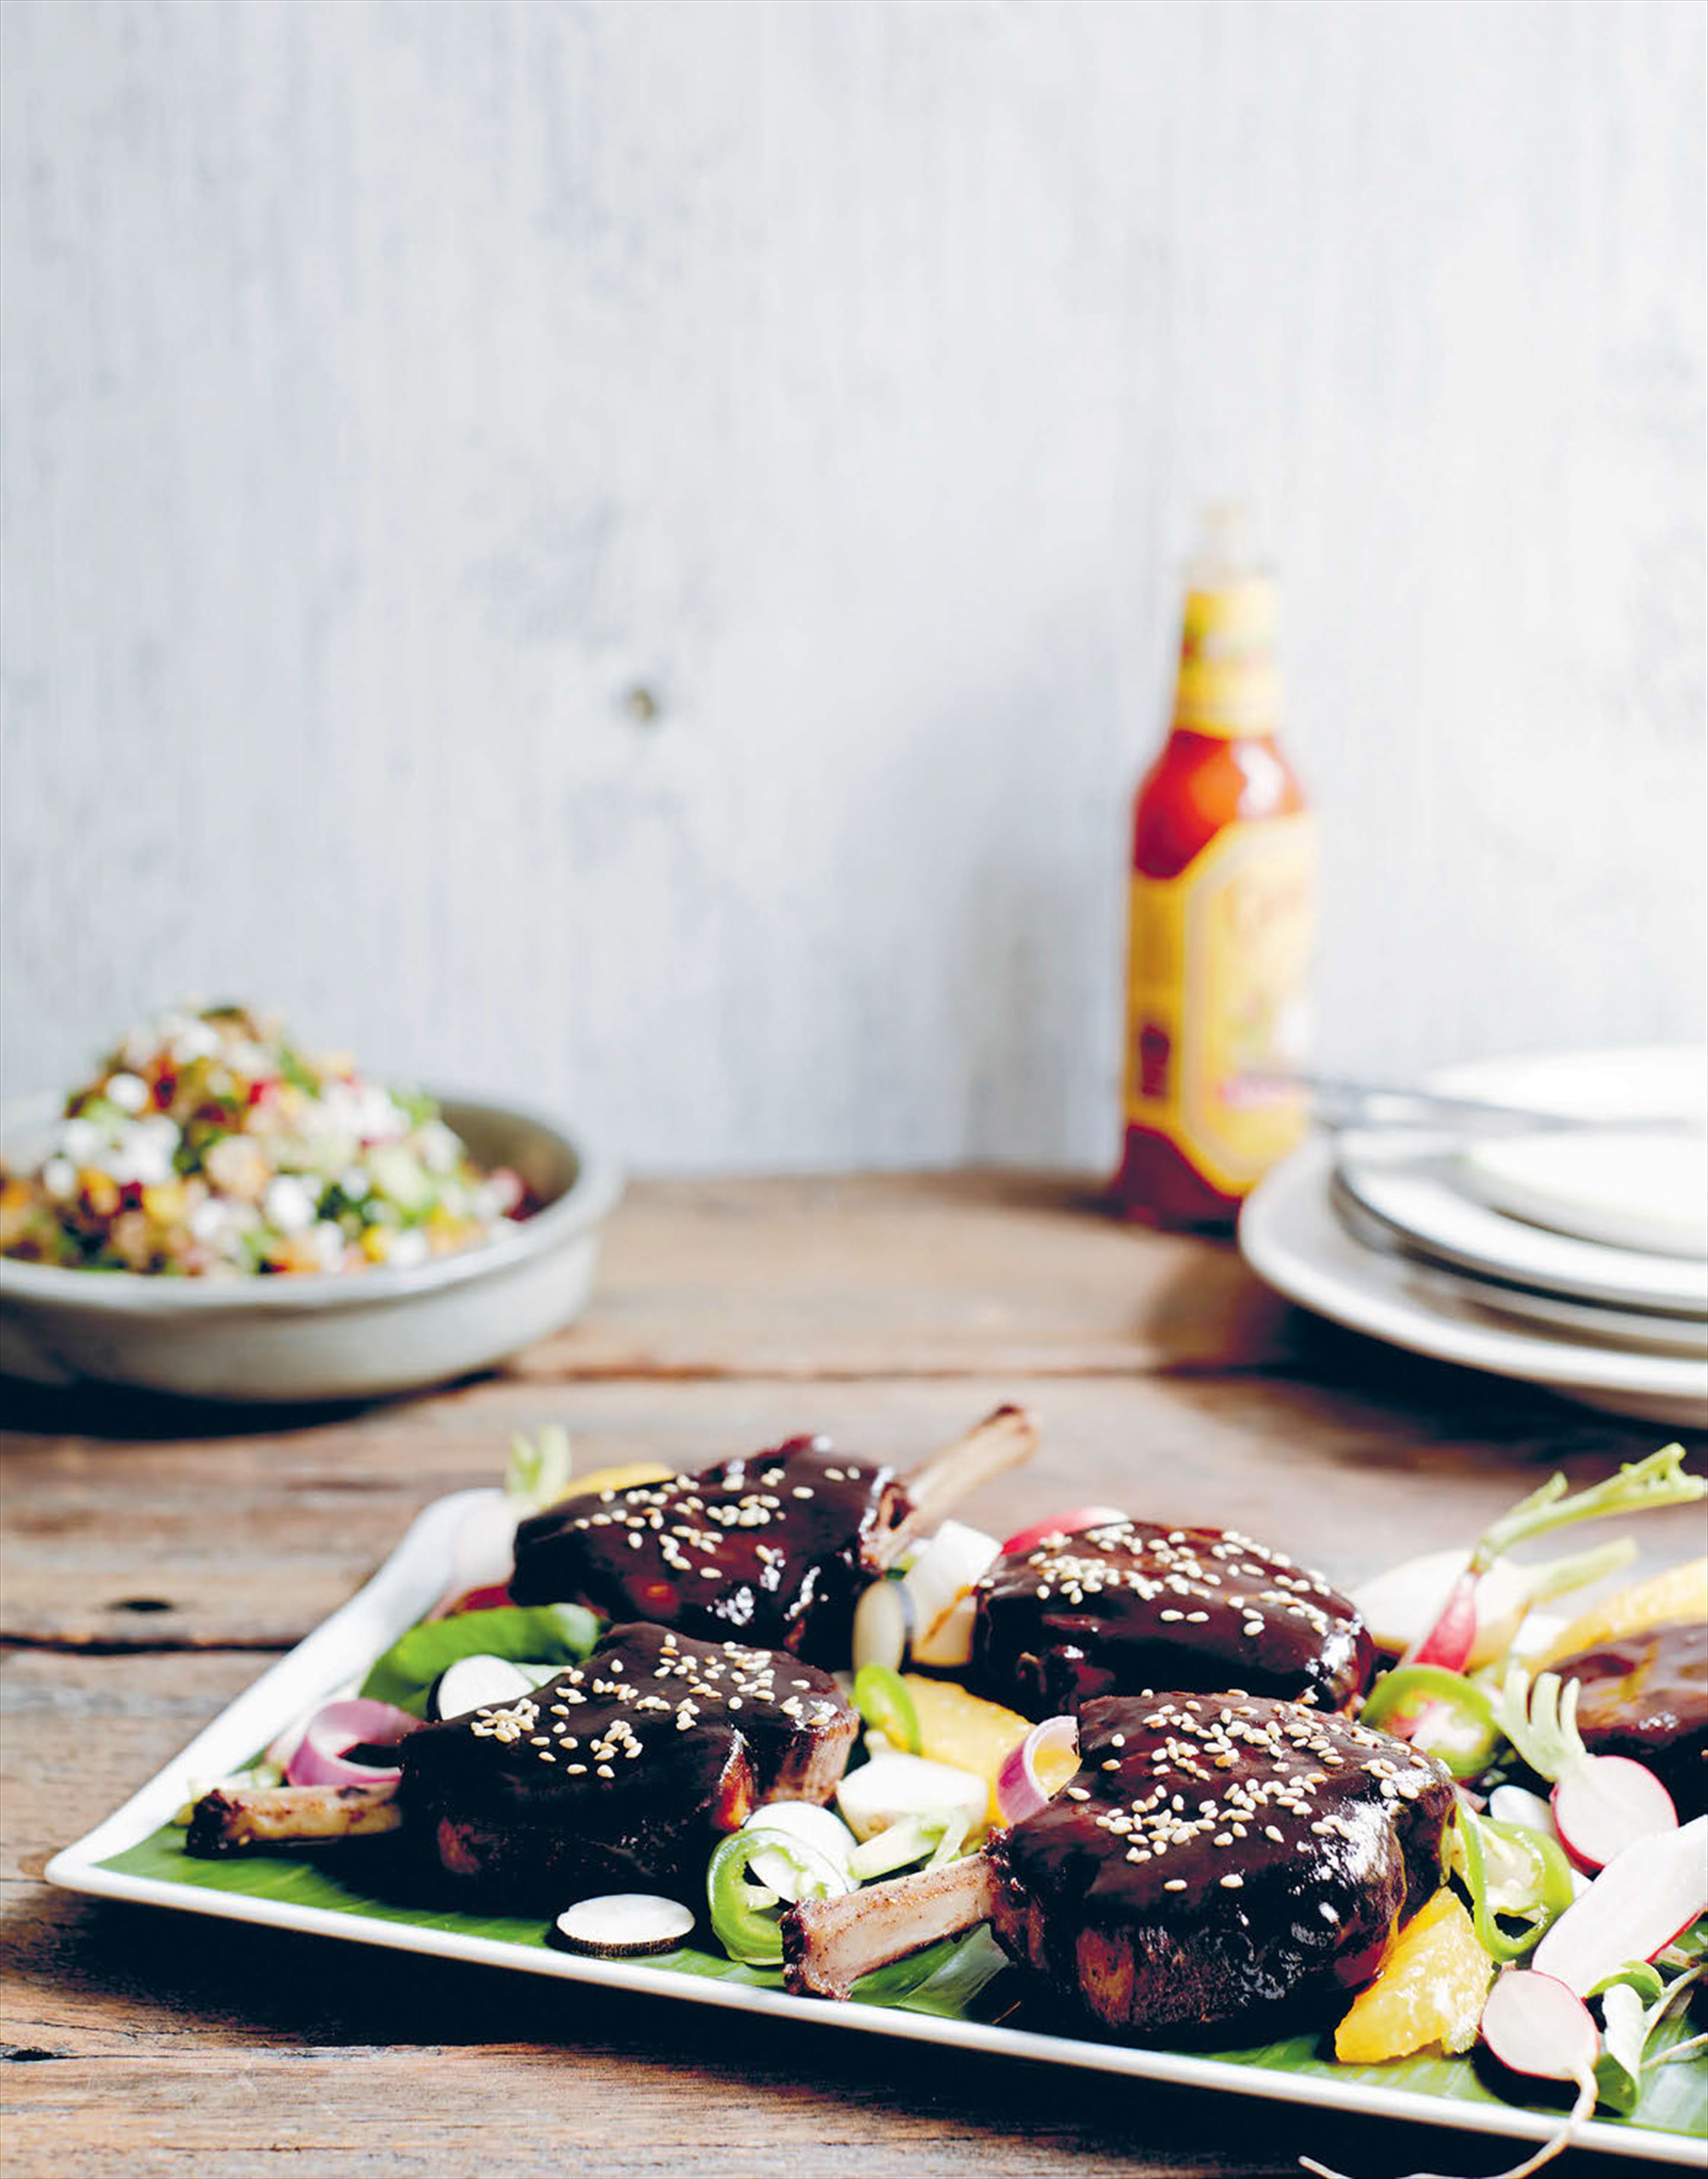 Glazed Mexican spiced lamb chops with ancient grains & pickles